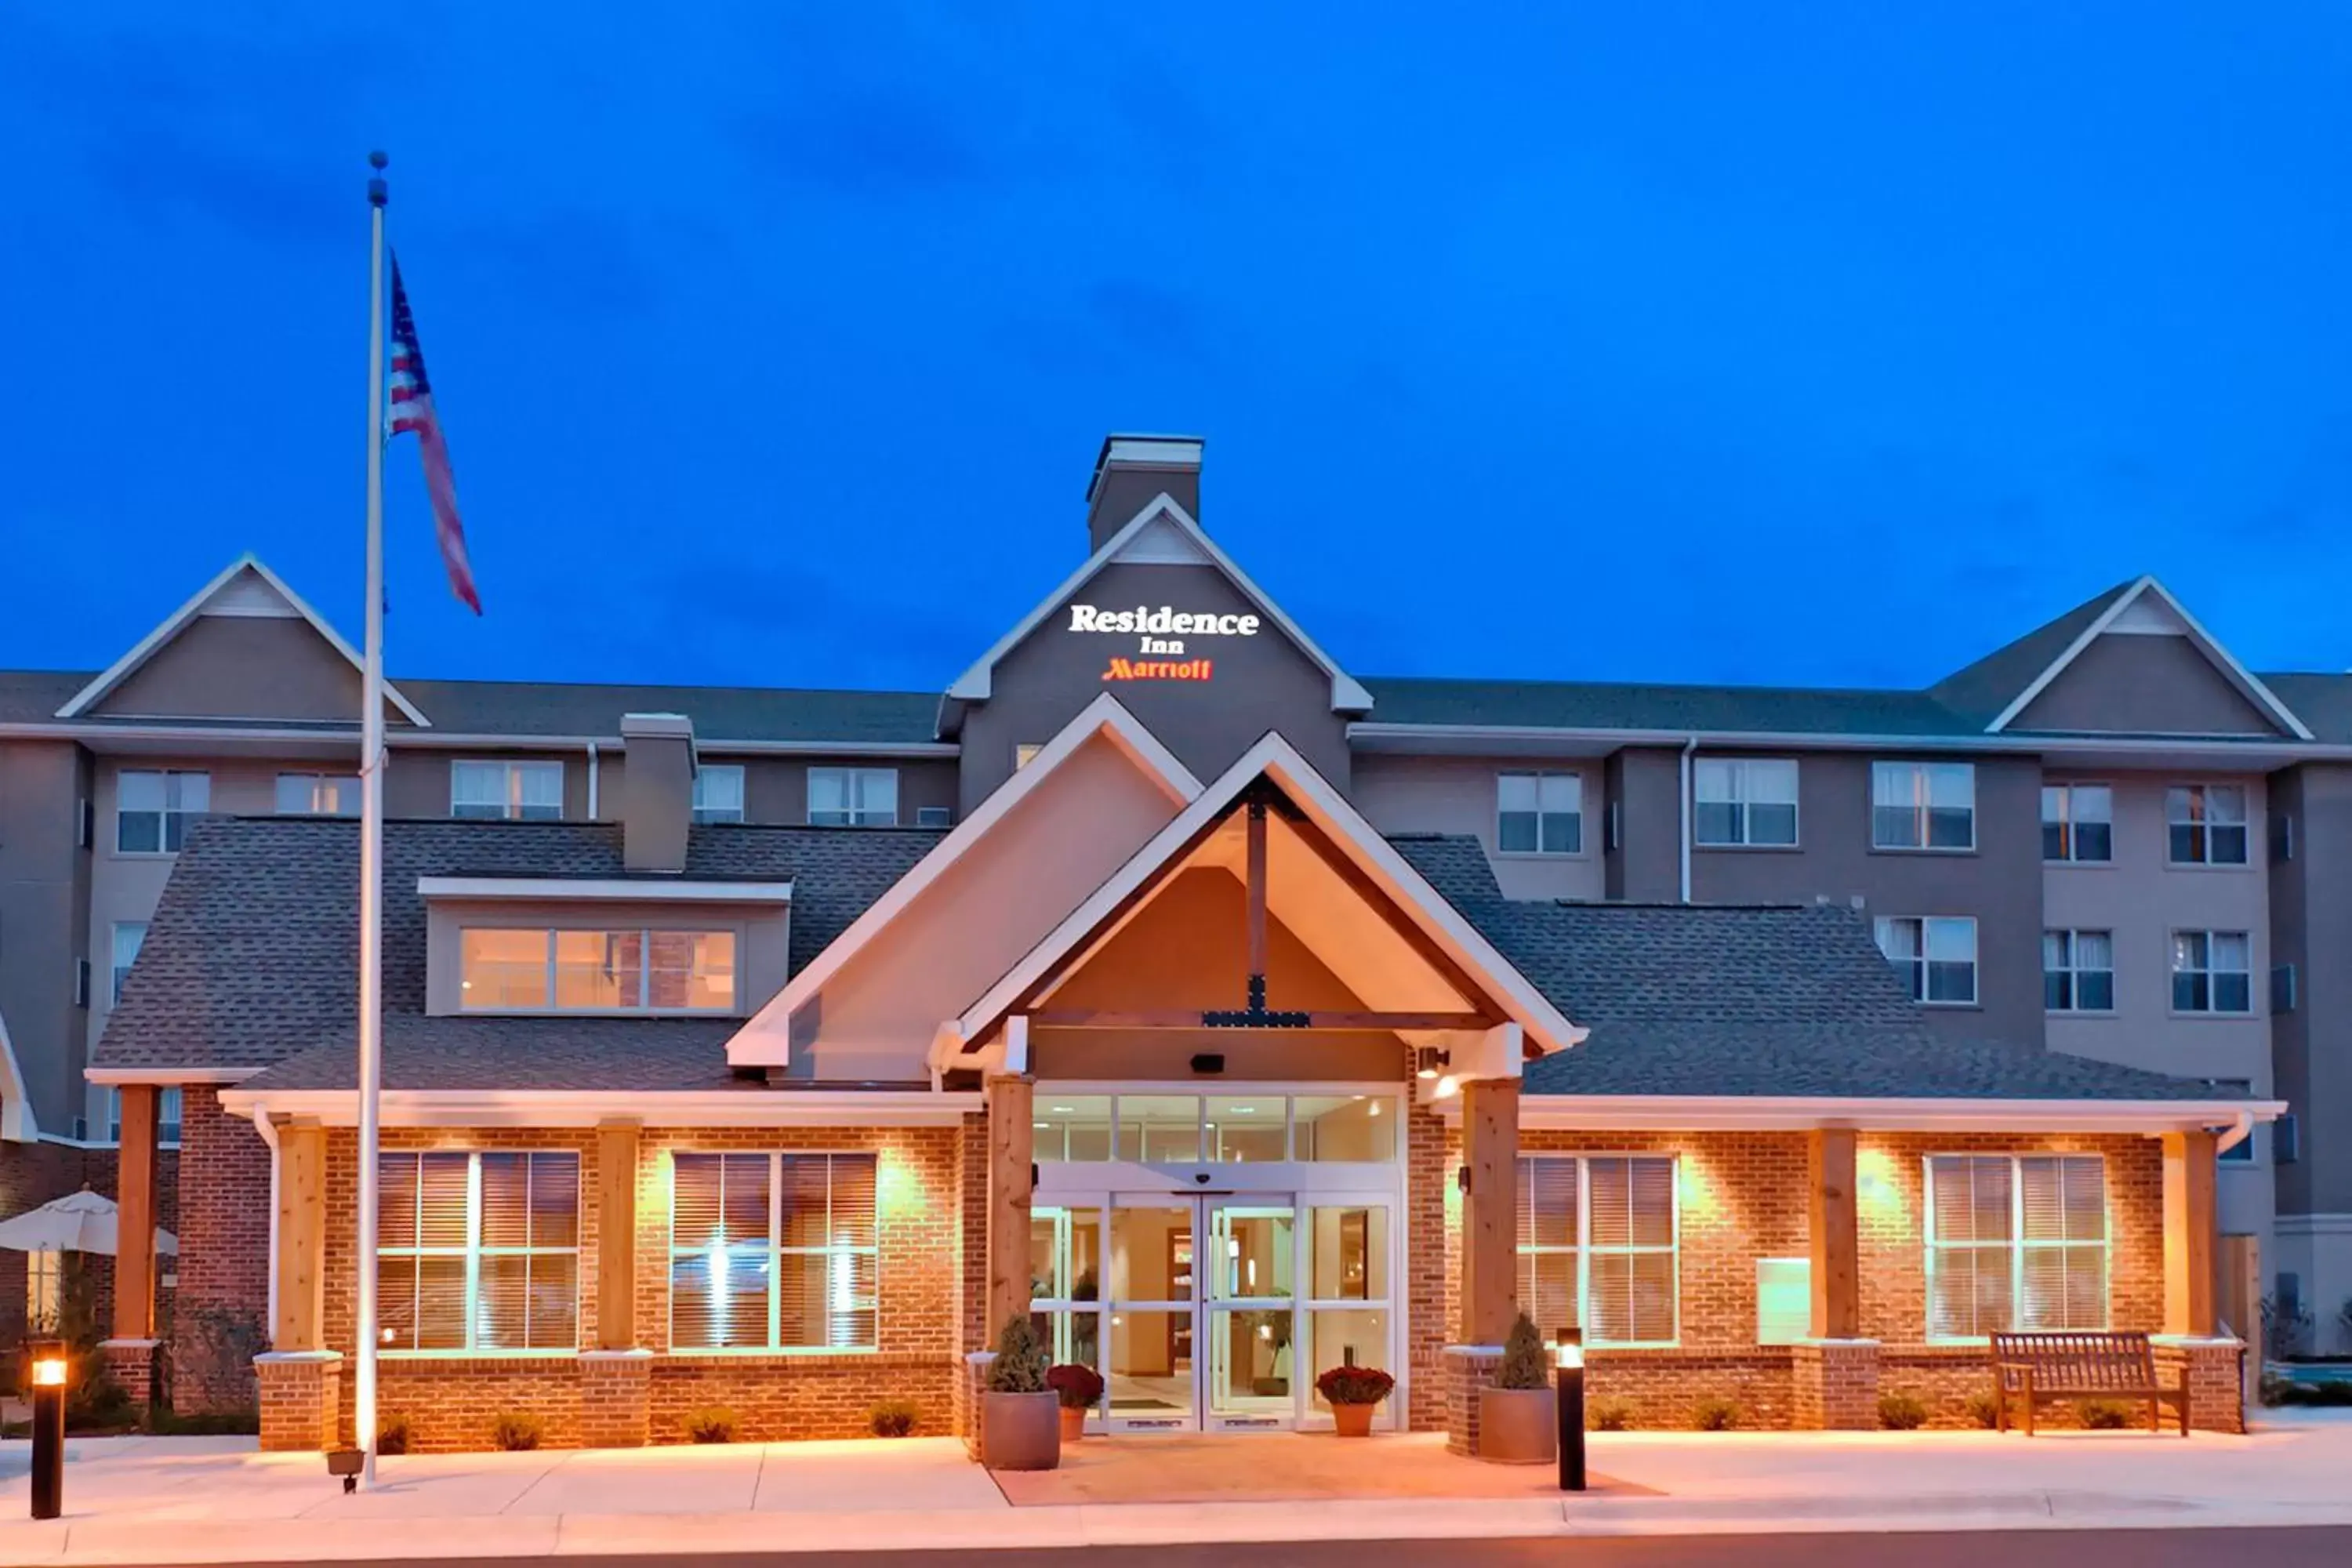 Property Building in Residence Inn South Bend Mishawaka